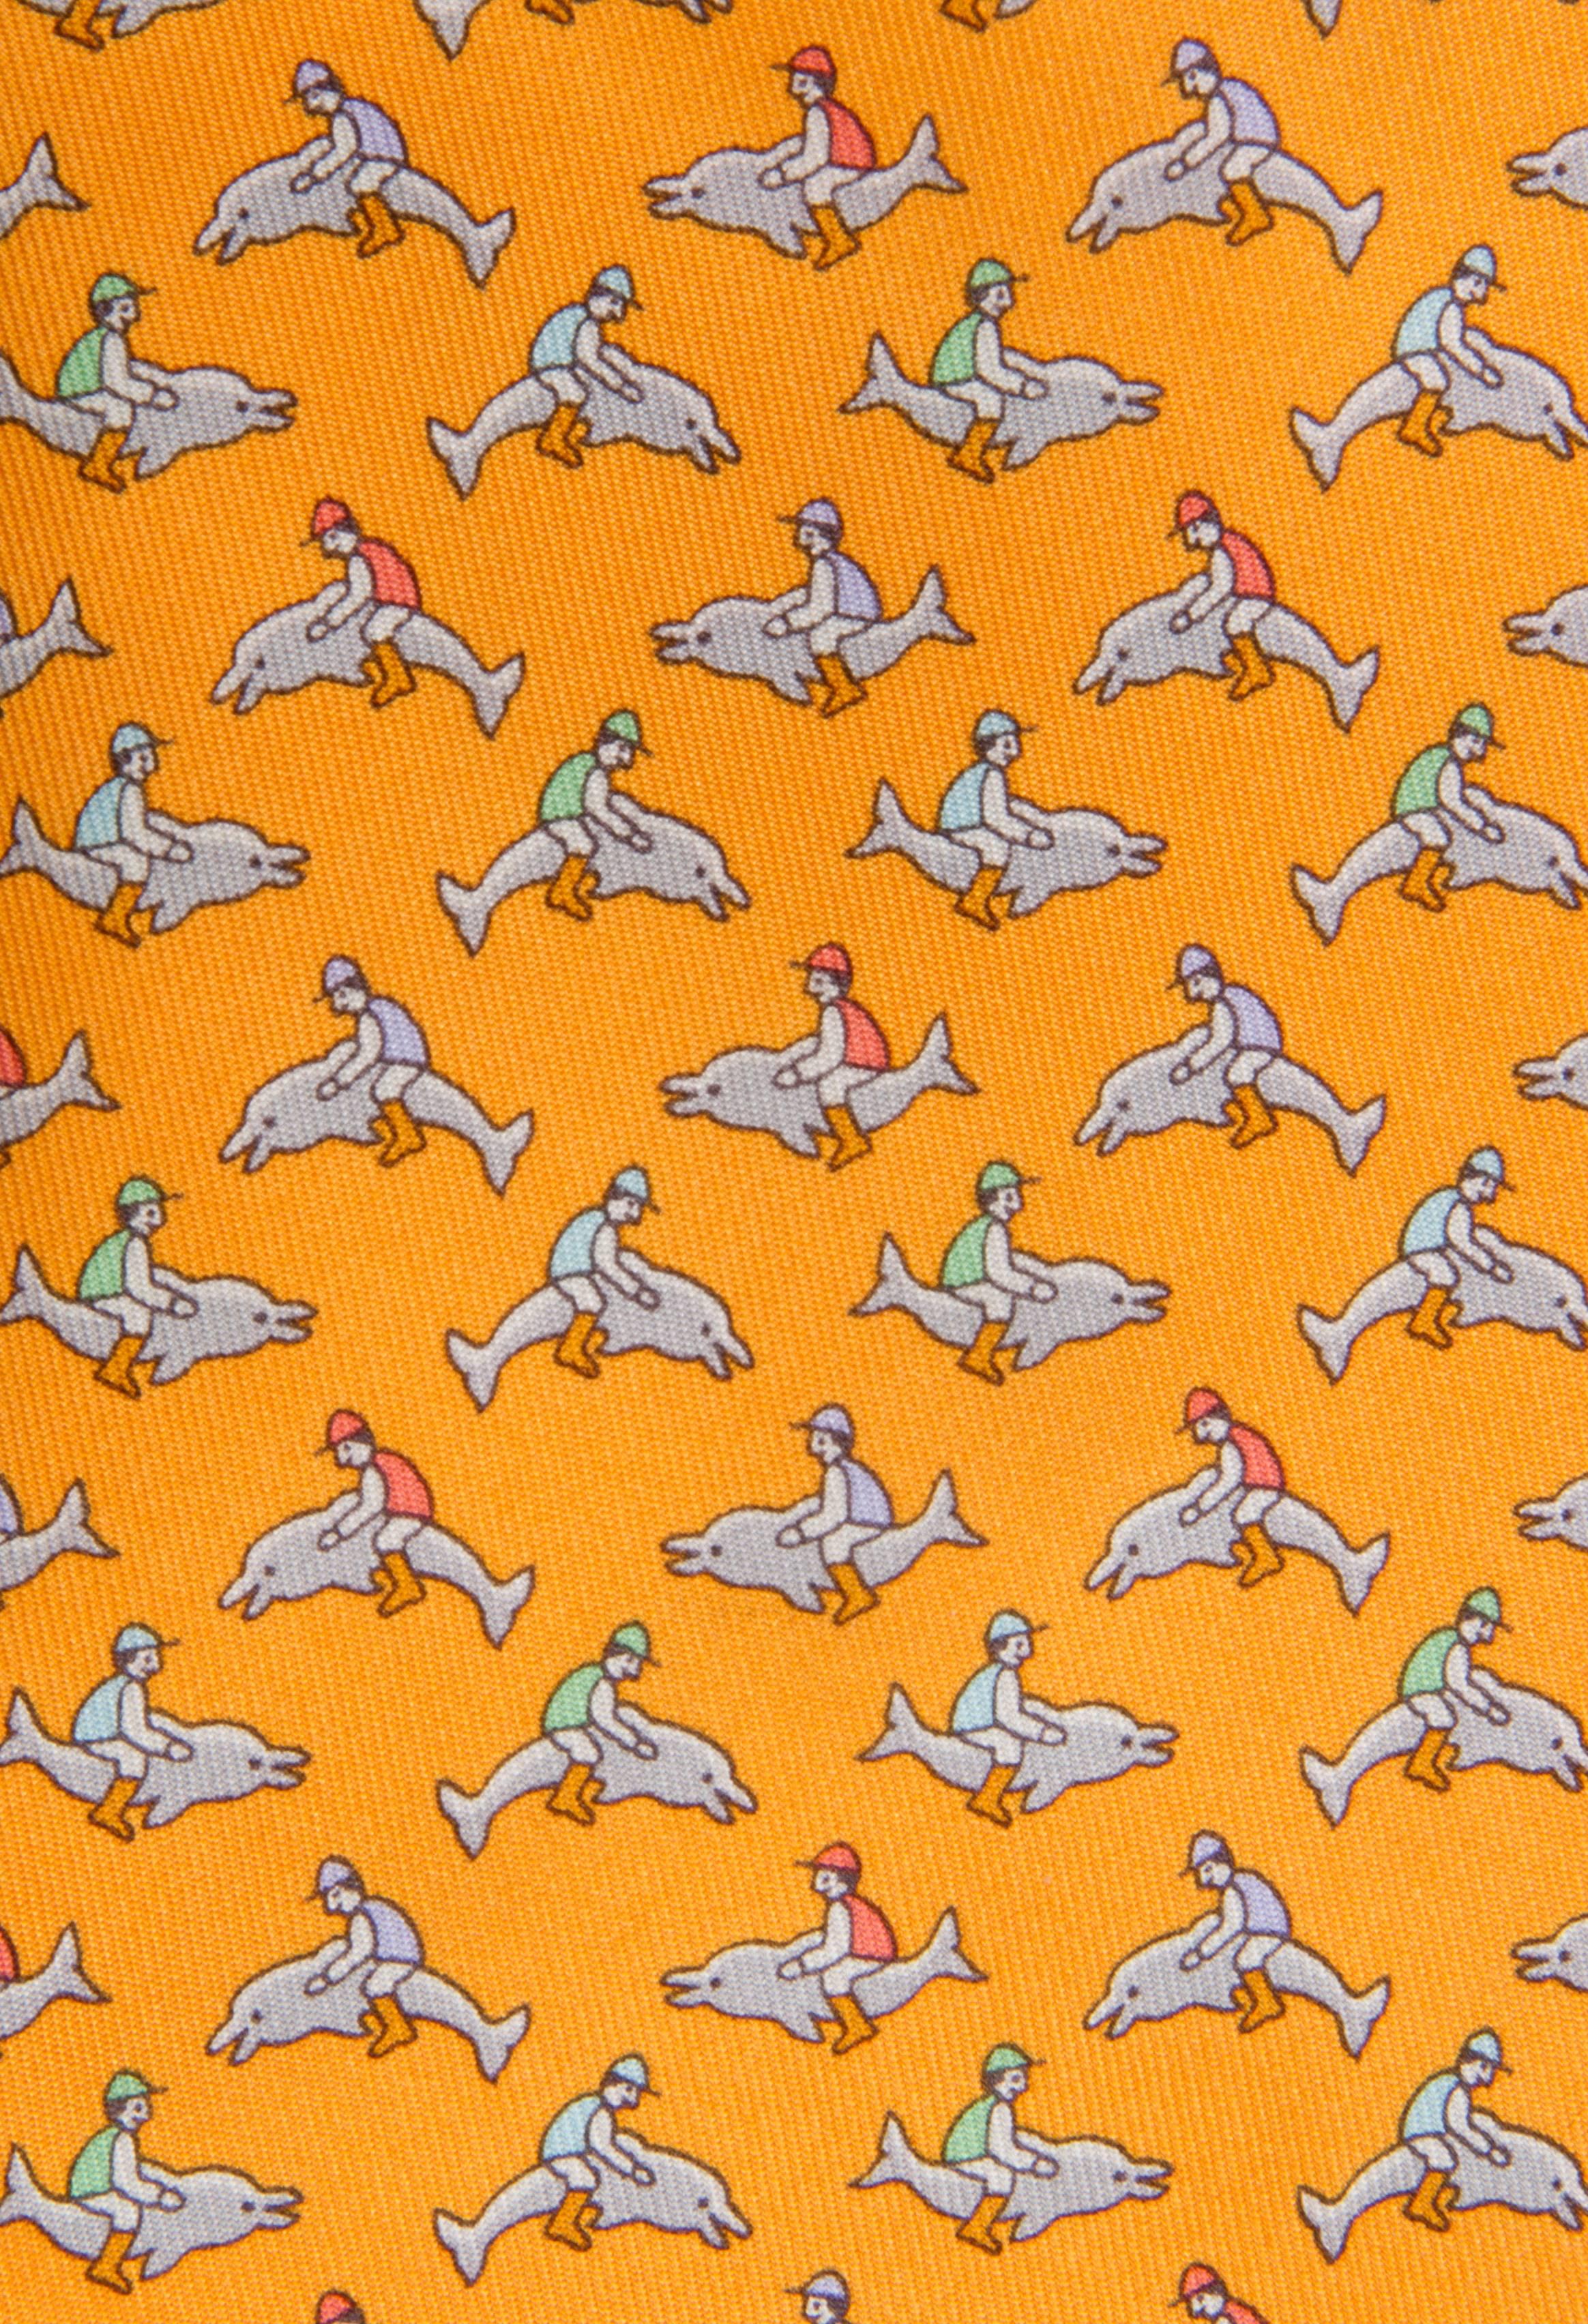 Jockeys sit atop dolphins on this whimsical tie.